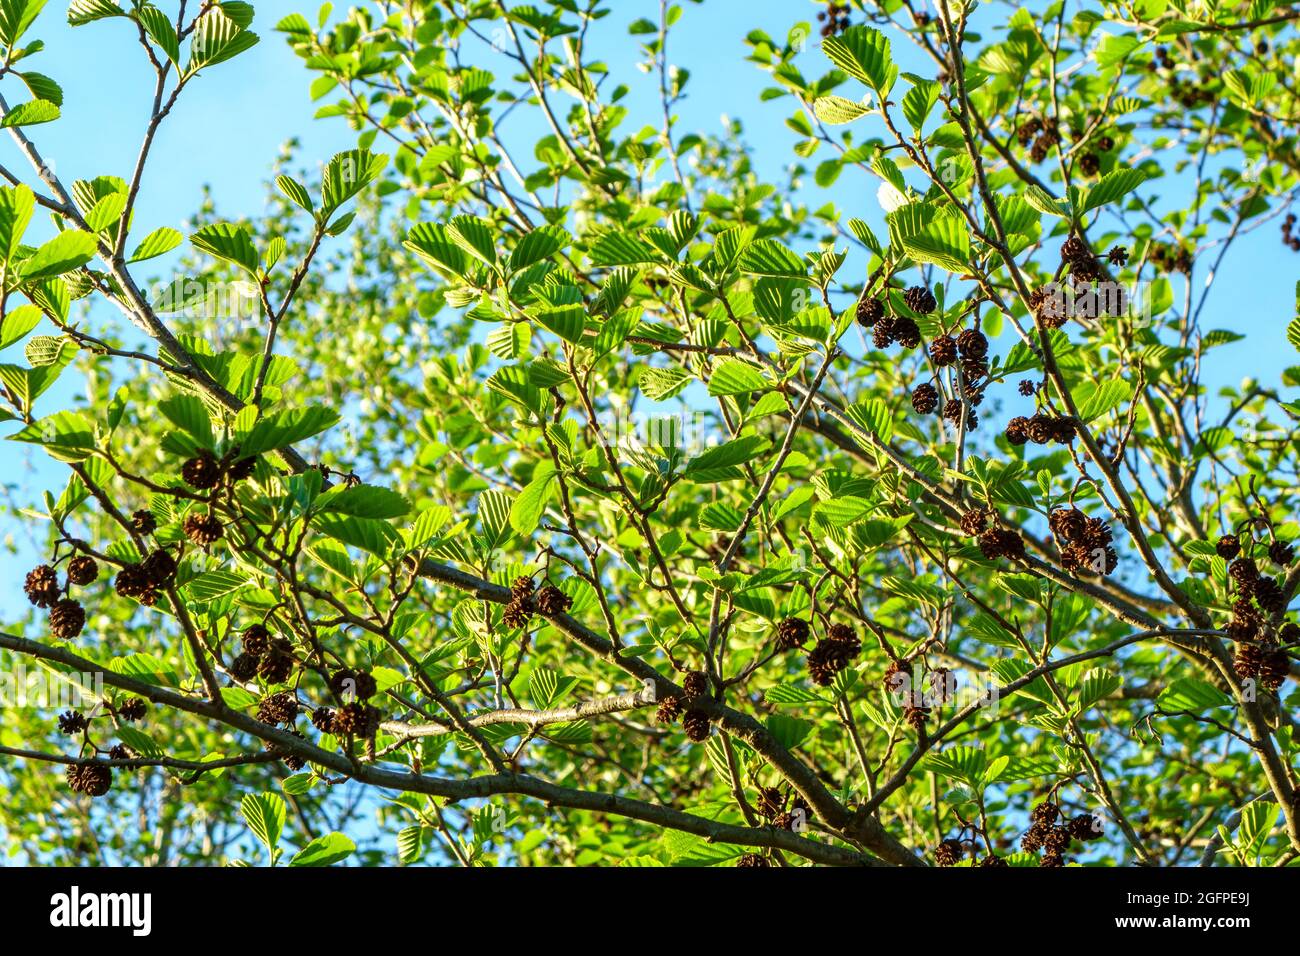 Alder branch with cones and green leaves, close-up in spring. Stock Photo